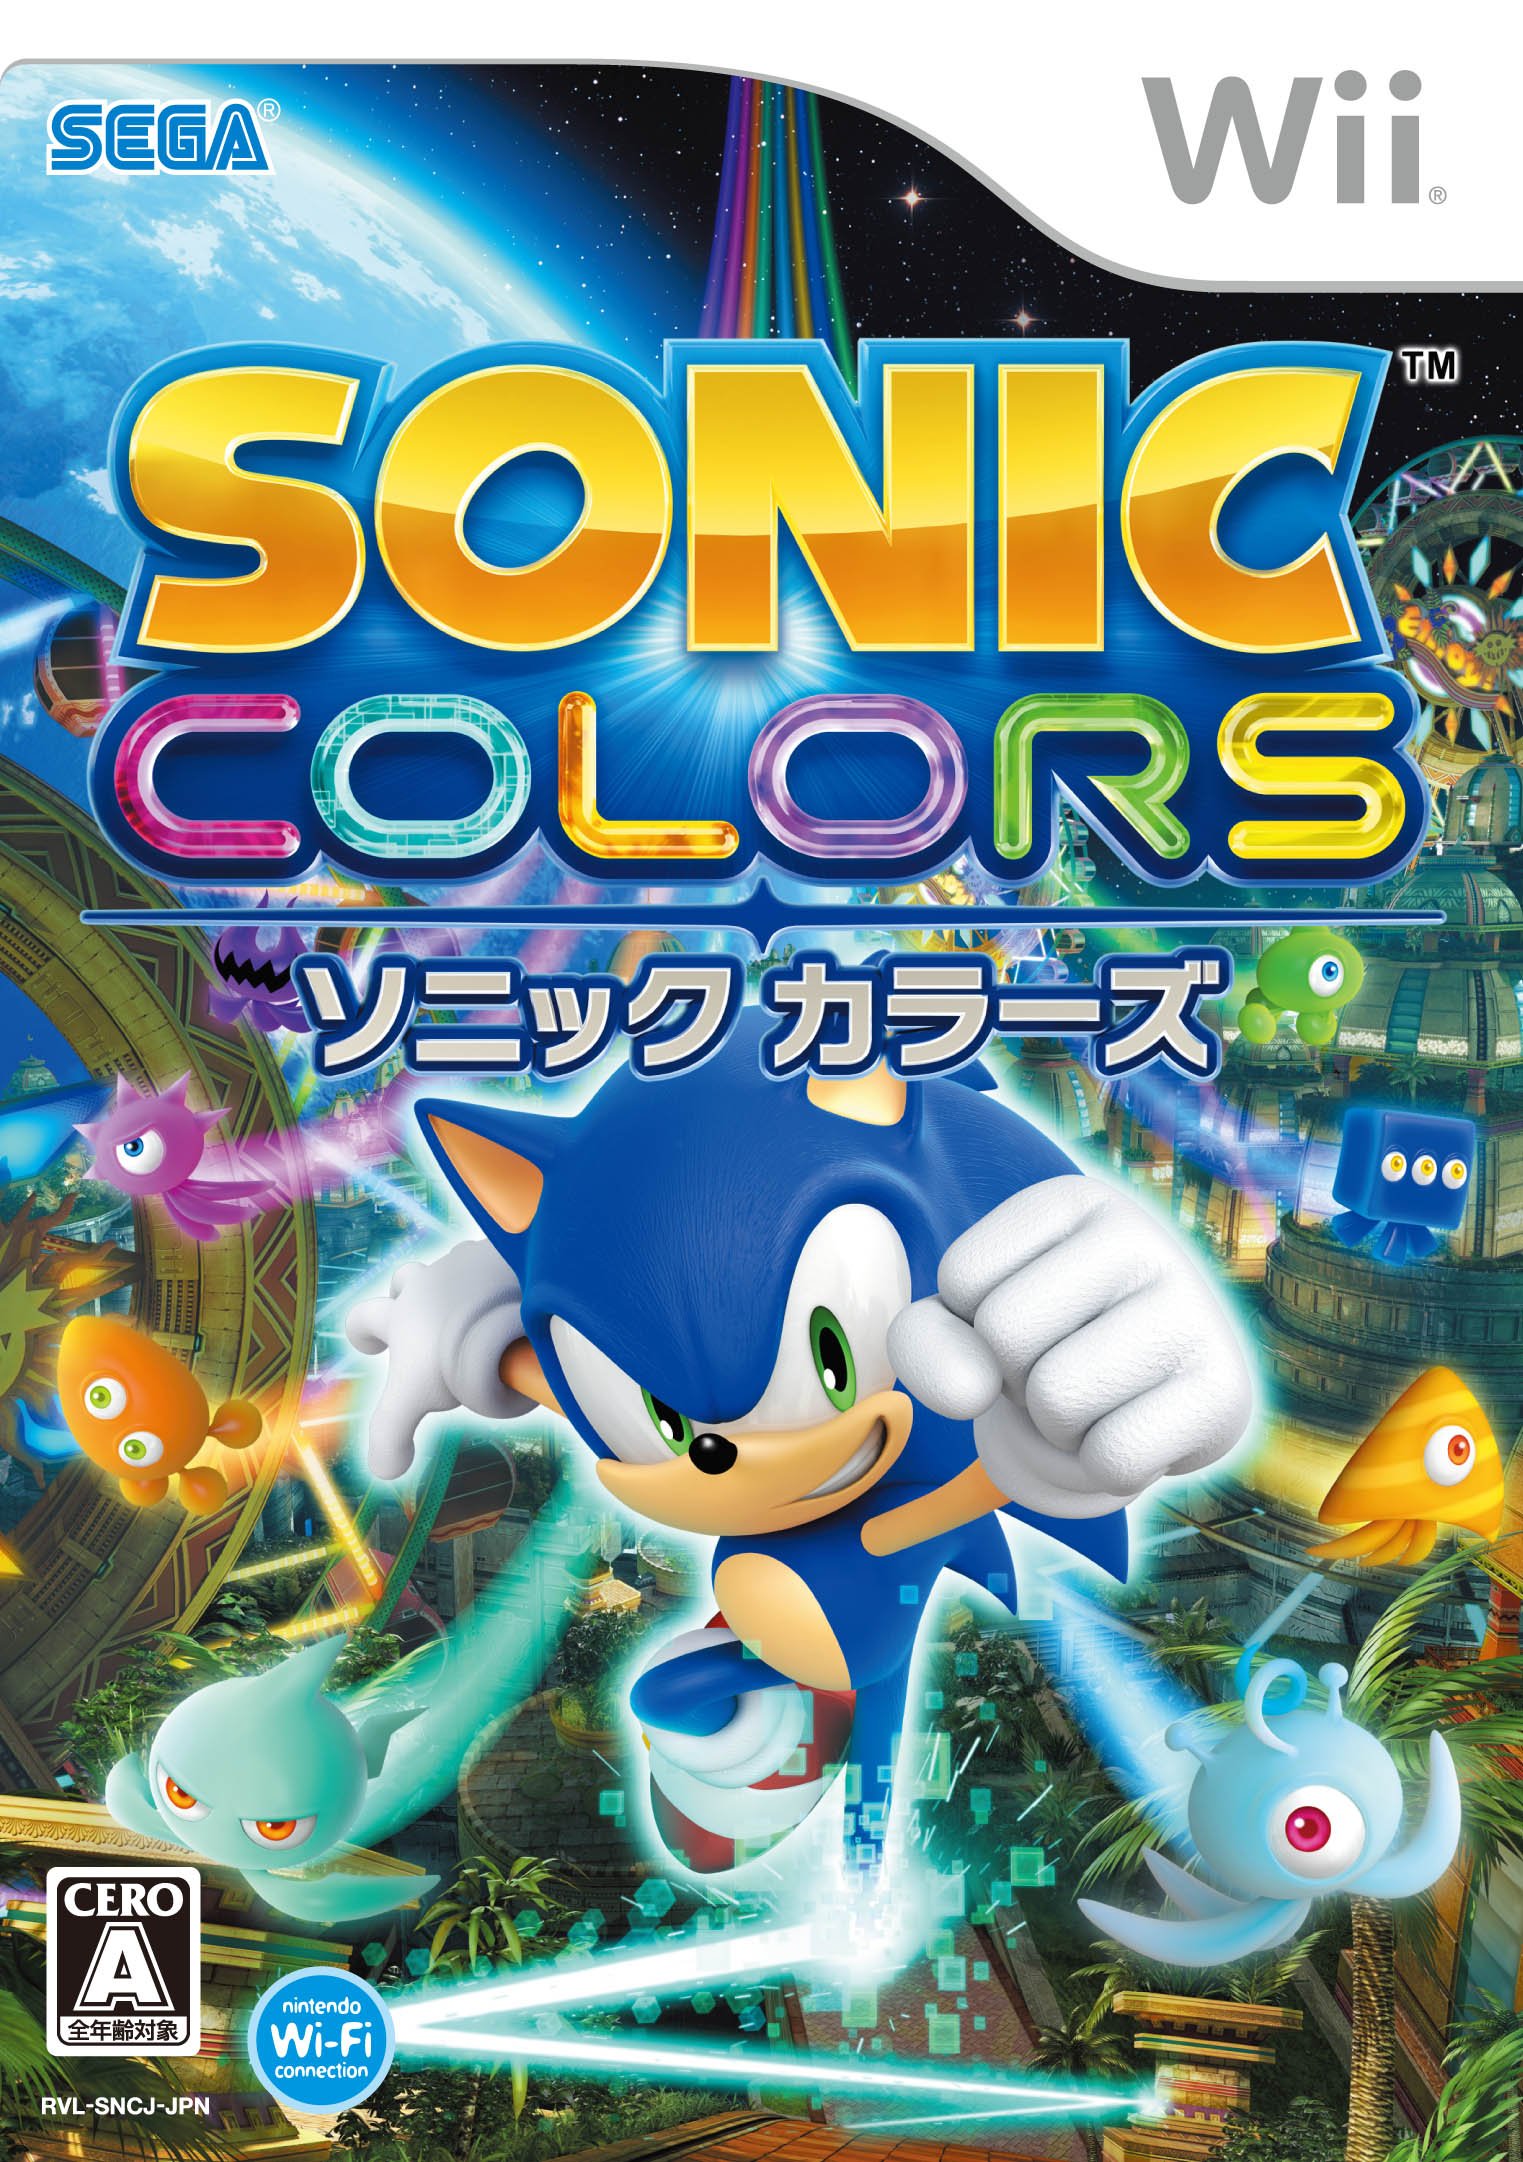 Sonic Colours DS demo available from today – Capsule Computers